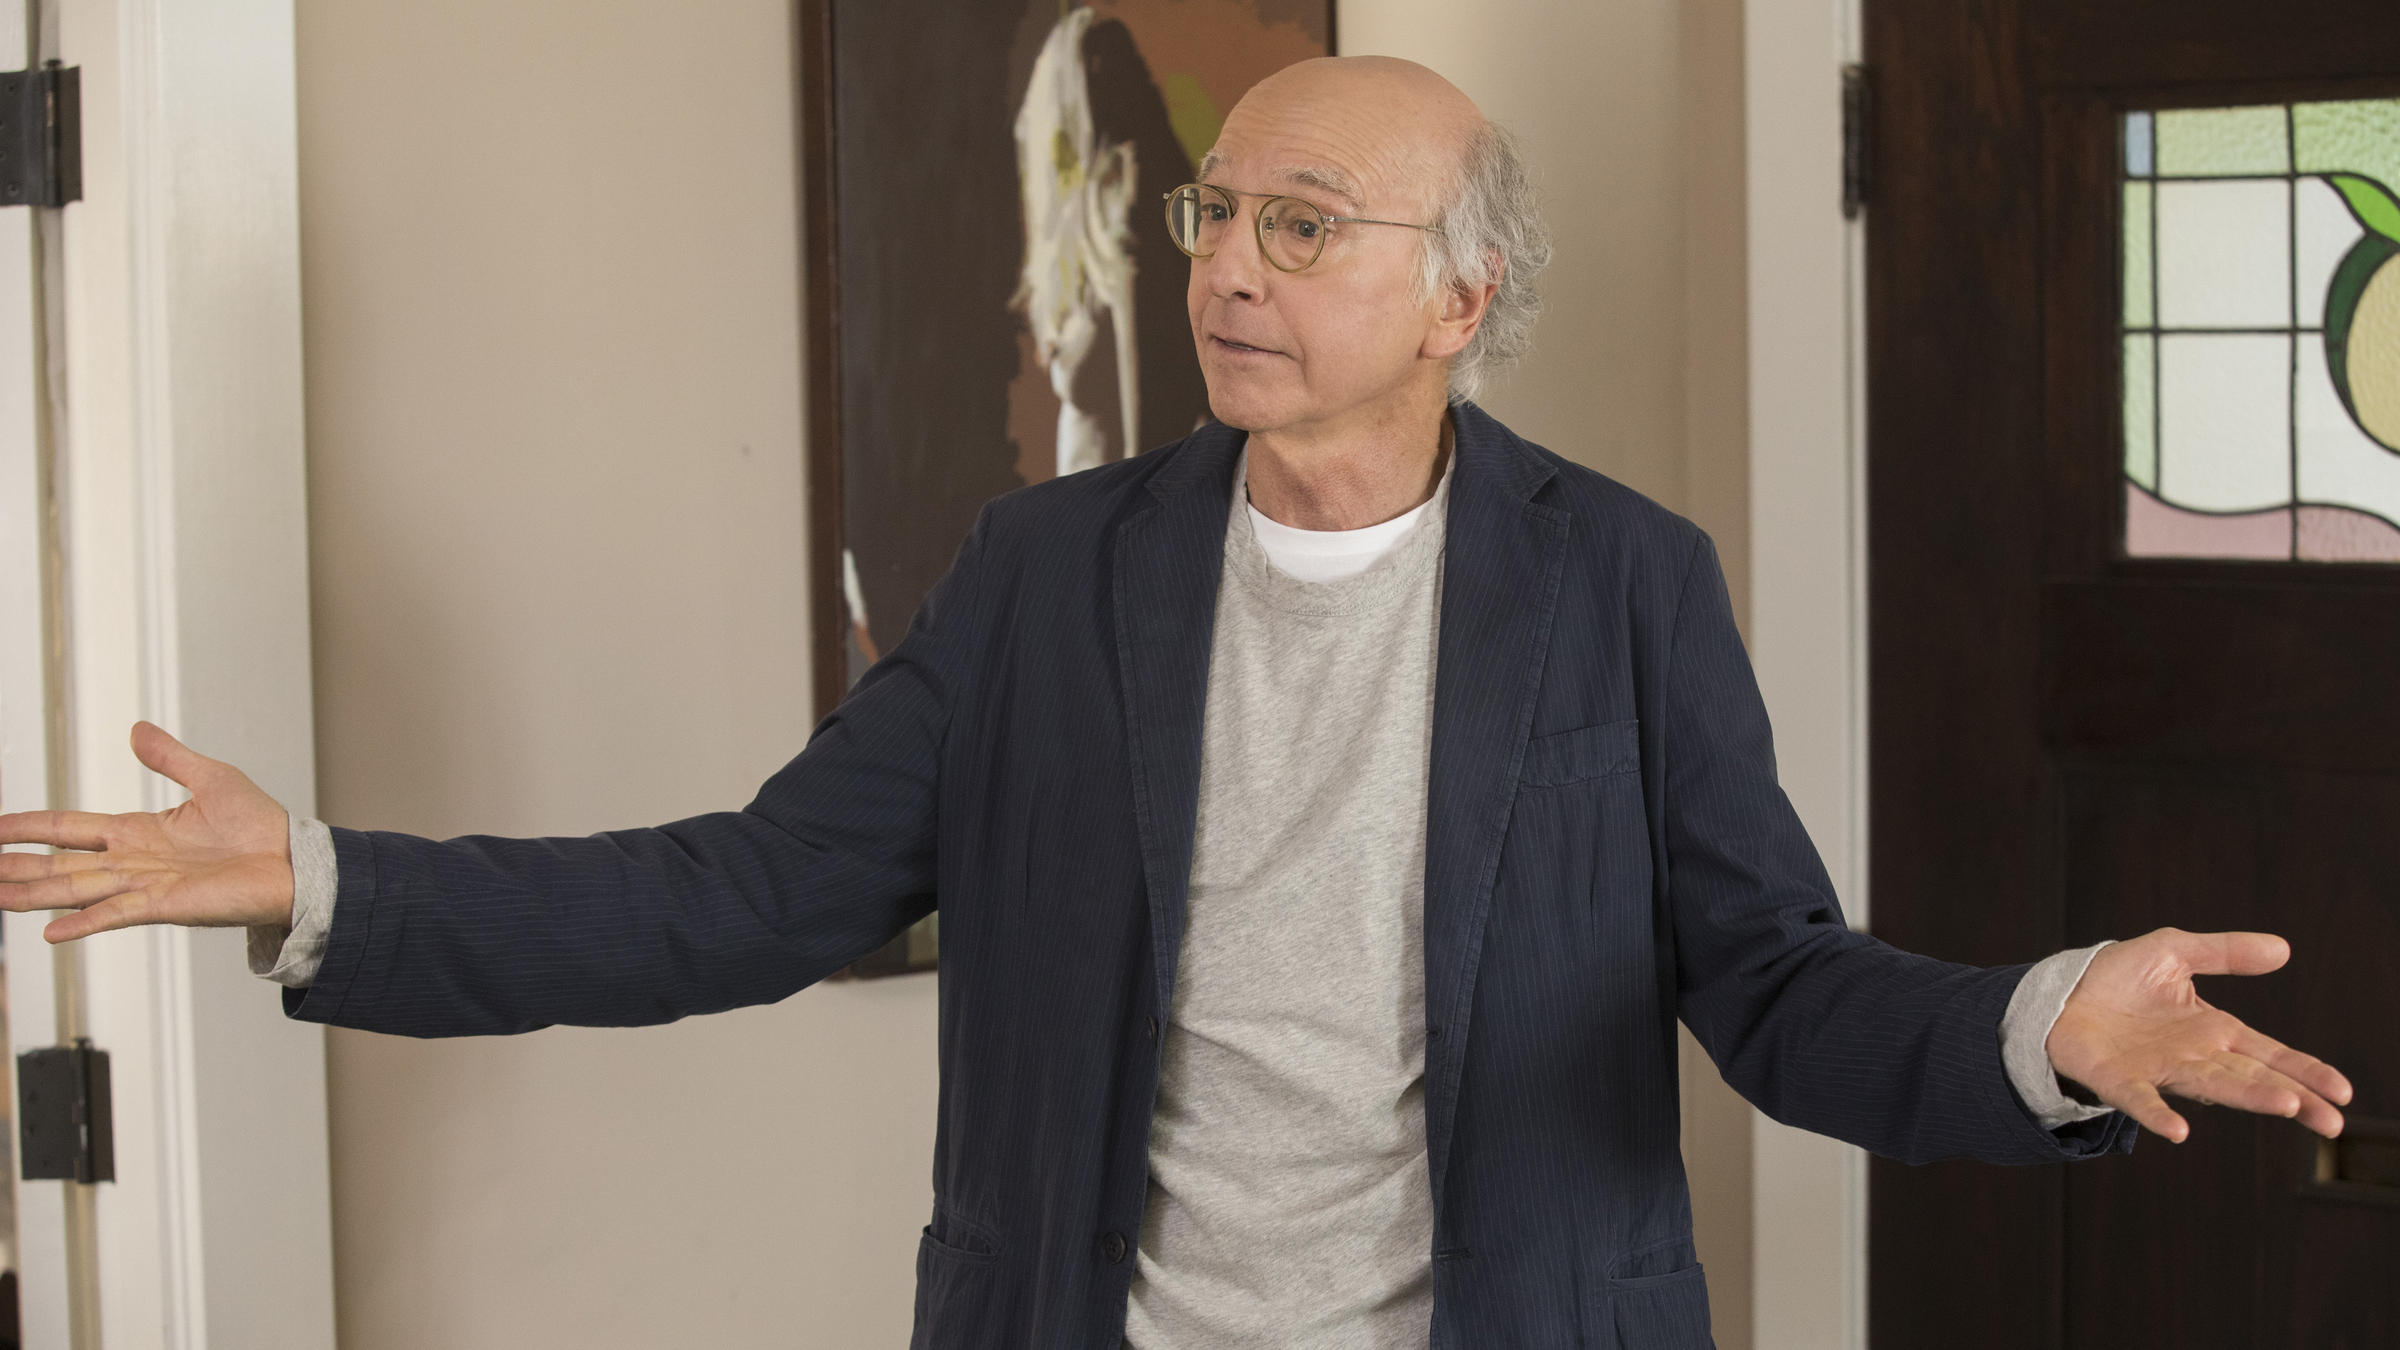 Download Curb Your Enthusiasm Returns And Larry David Is Back To Playing Himself Kcbx SVG Cut Files